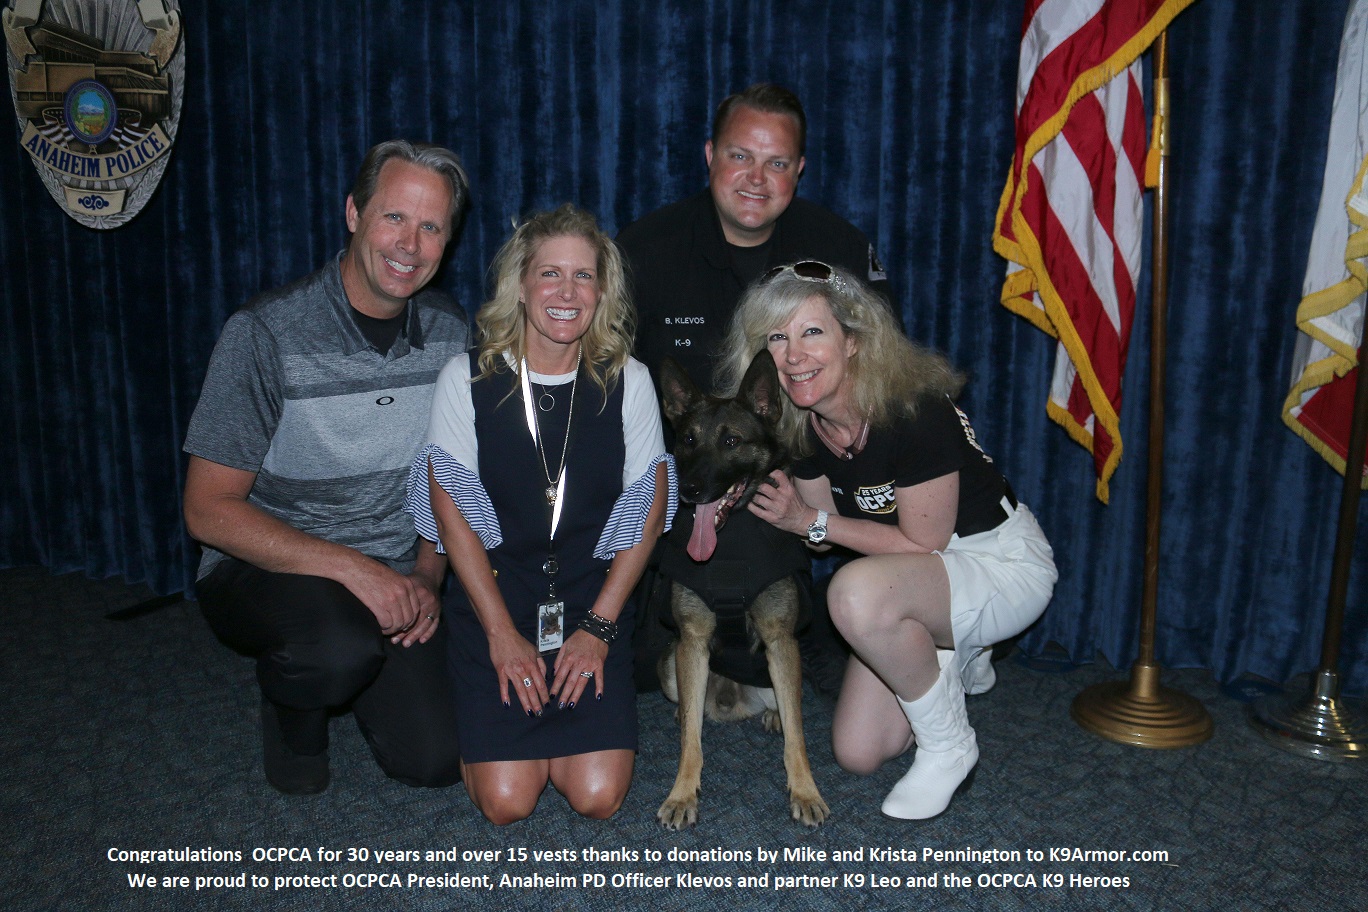 Orange County Police Canine Association President, Anaheim PD  Officer Klevos and K9 Leo with sponsors Mike and Krista Pennington with K9 Armor cofounder Suzanne Saunders